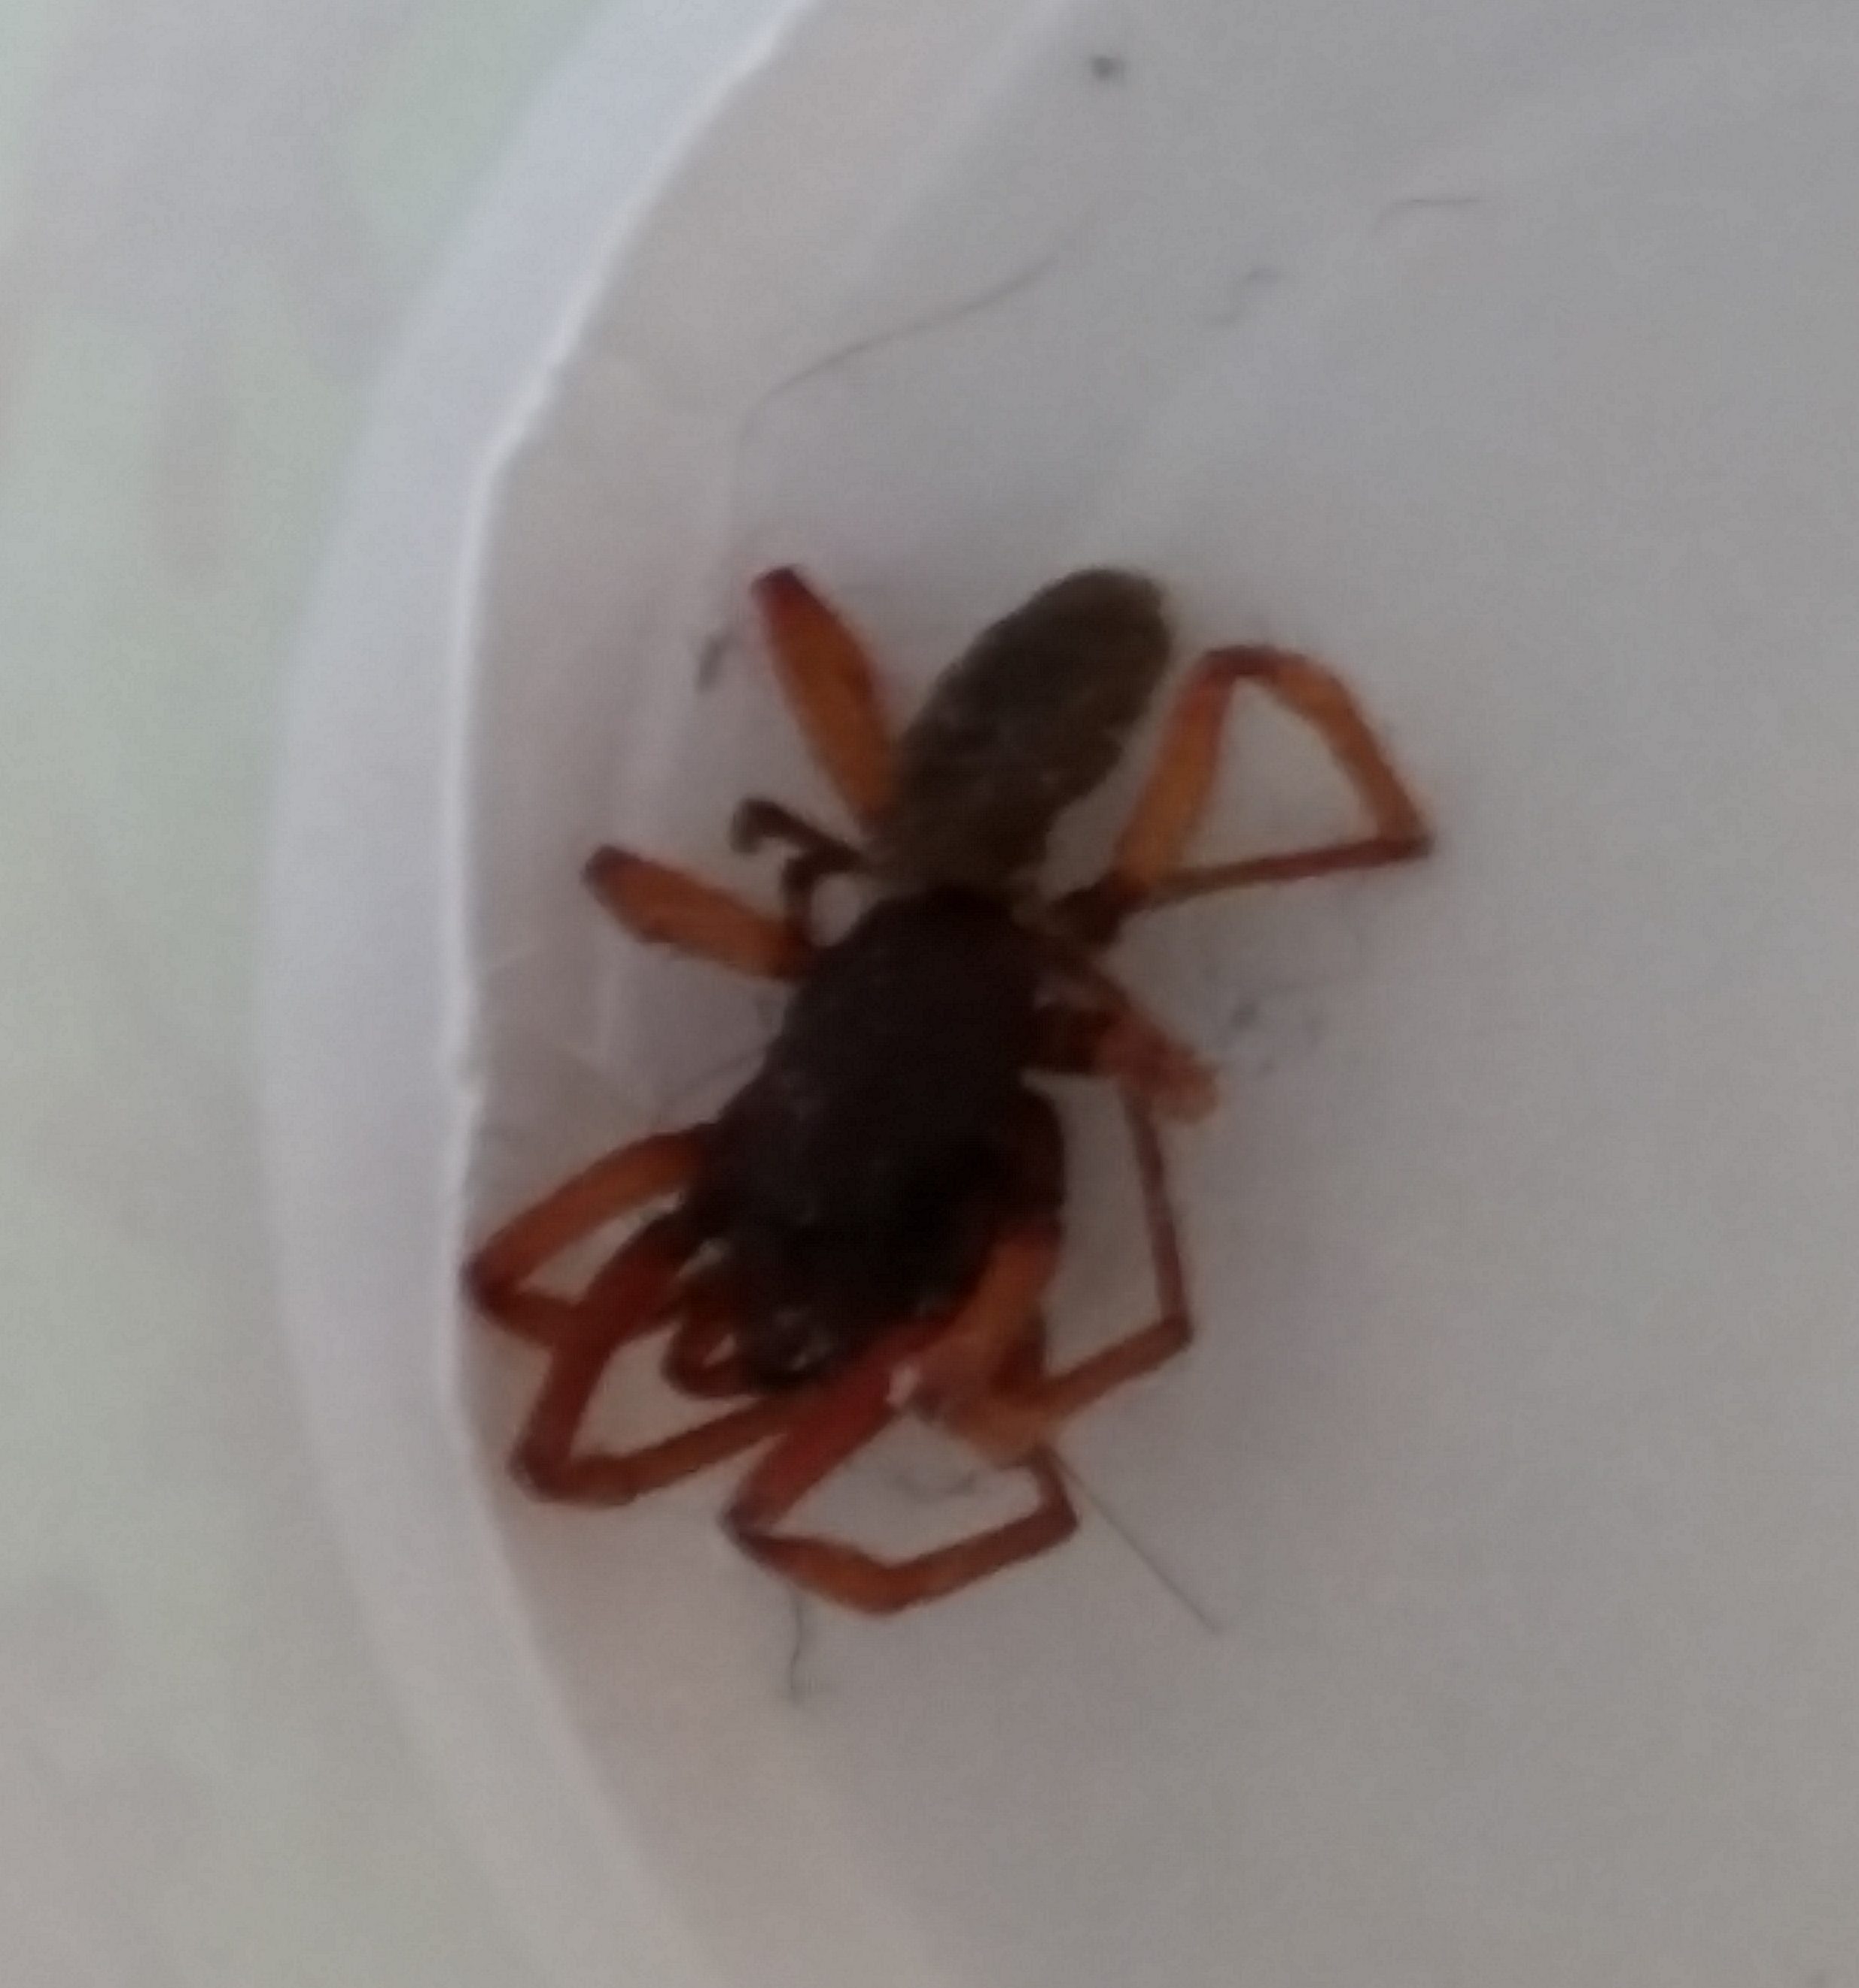 Picture of Dysdera crocata (Woodlouse Hunter) - Lateral